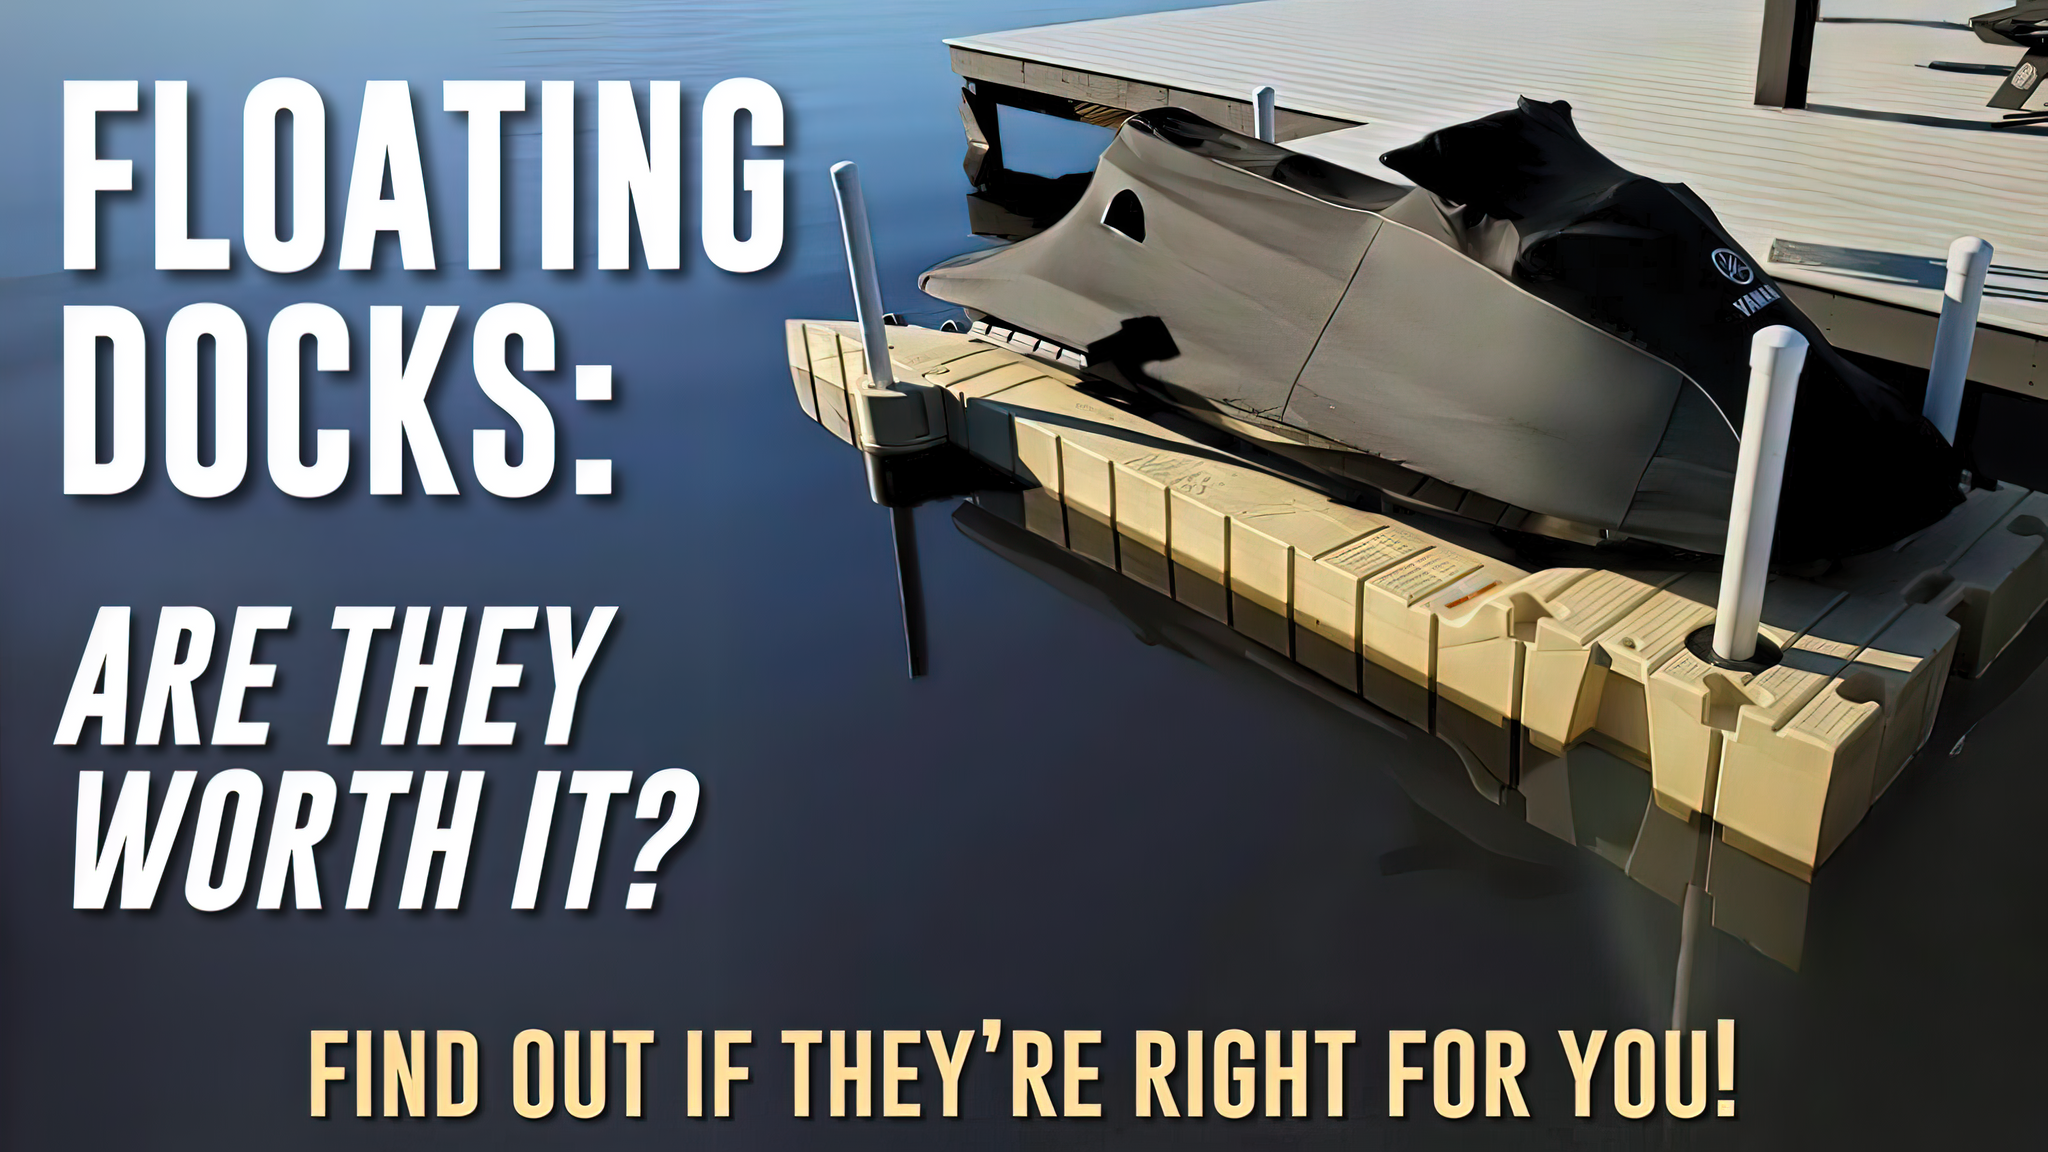 Floating Docks: Are They Worth It? Find Out if They're Right For You!